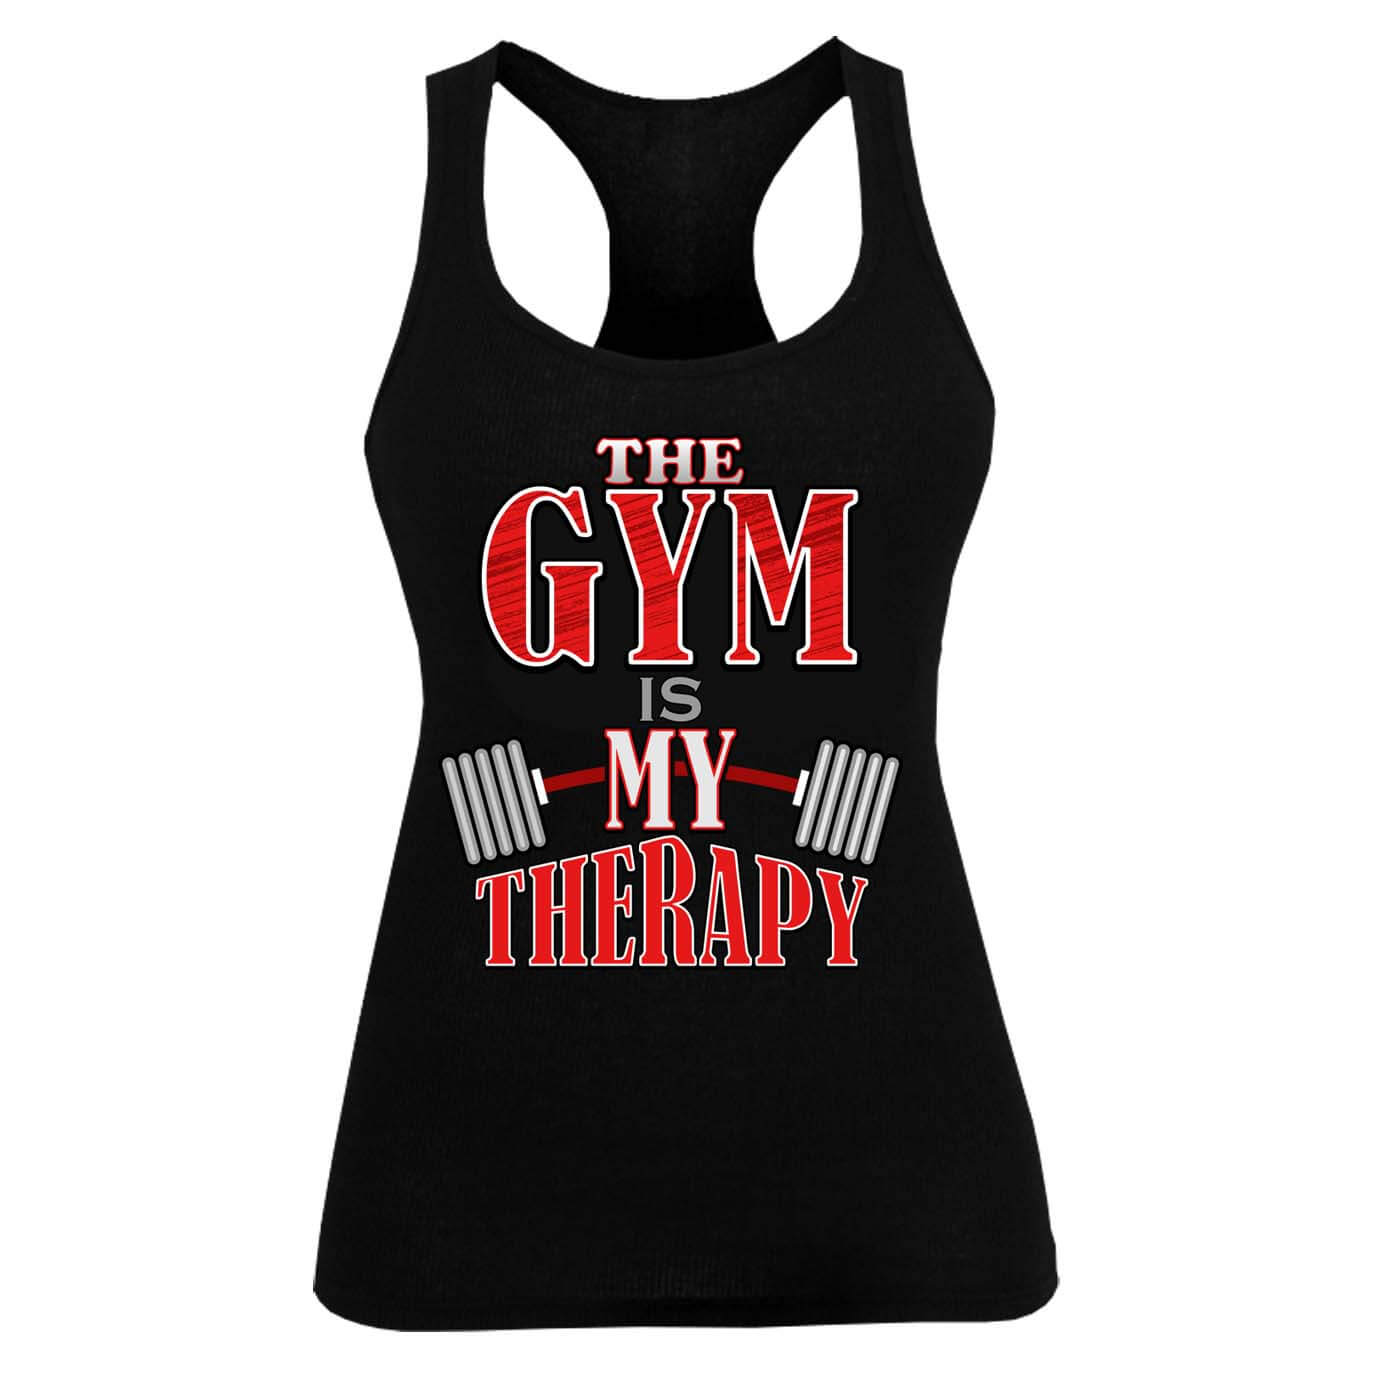 The Gym is My Therapy